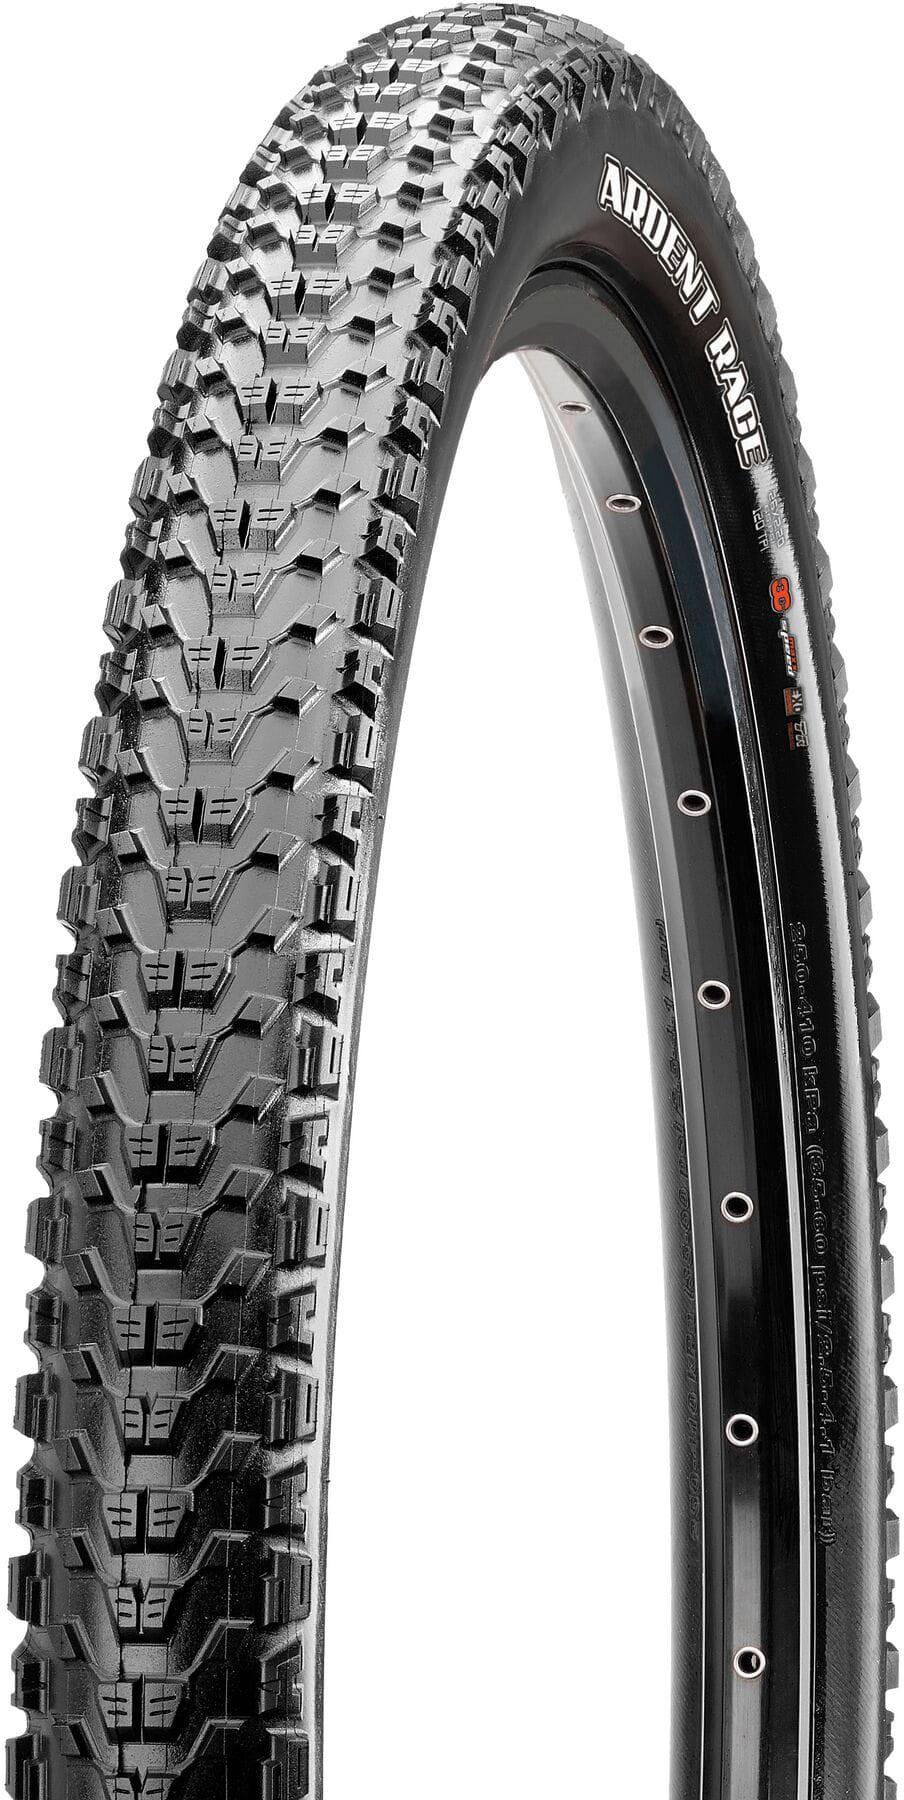 Maxxis Ardent 26 X 2.25  Bike Tyre, Dual Compound Exo/Tr, 60 Tpi